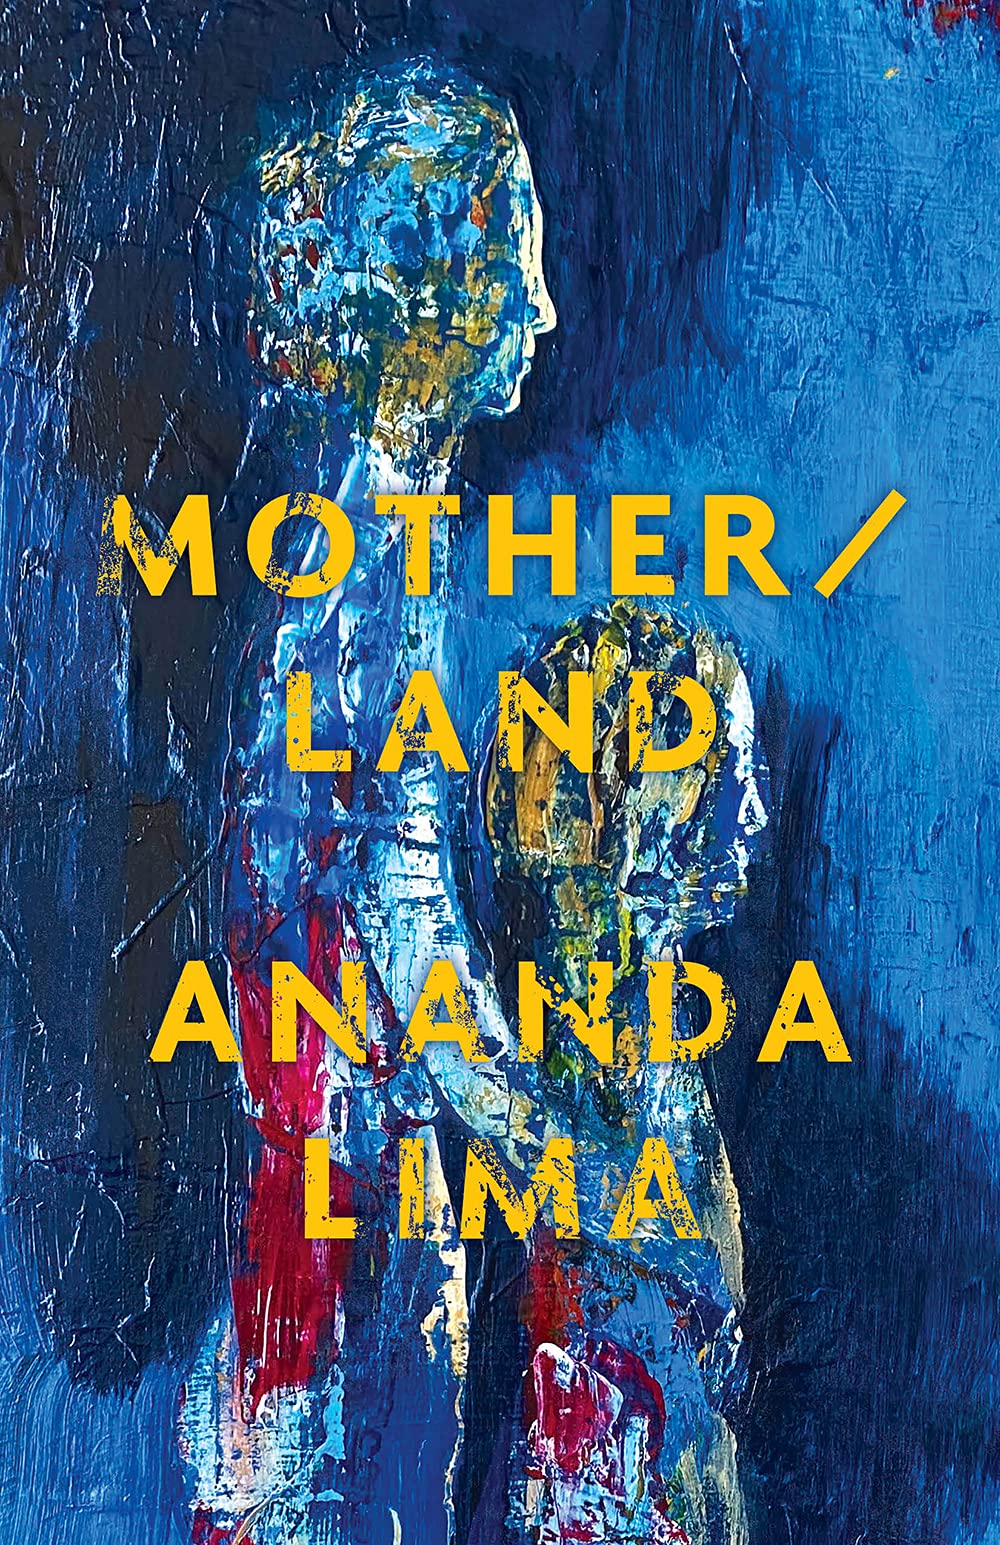 The front cover of the book Mother Land. There is a painting of a woman holding her child